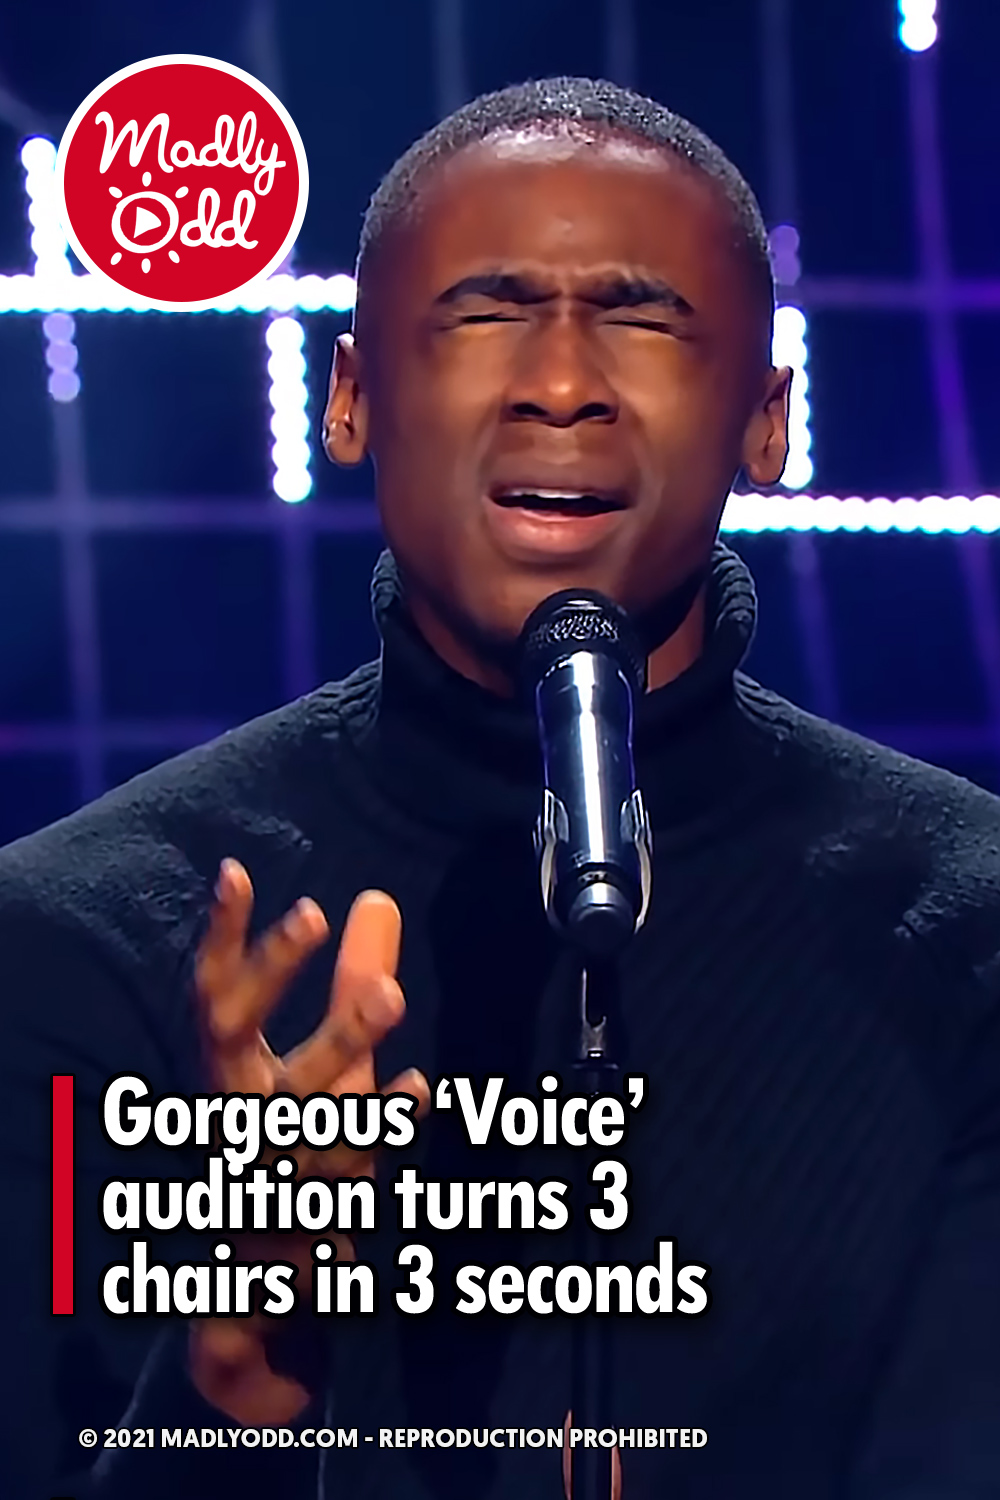 Gorgeous ‘Voice’ audition turns 3 chairs in 3 seconds